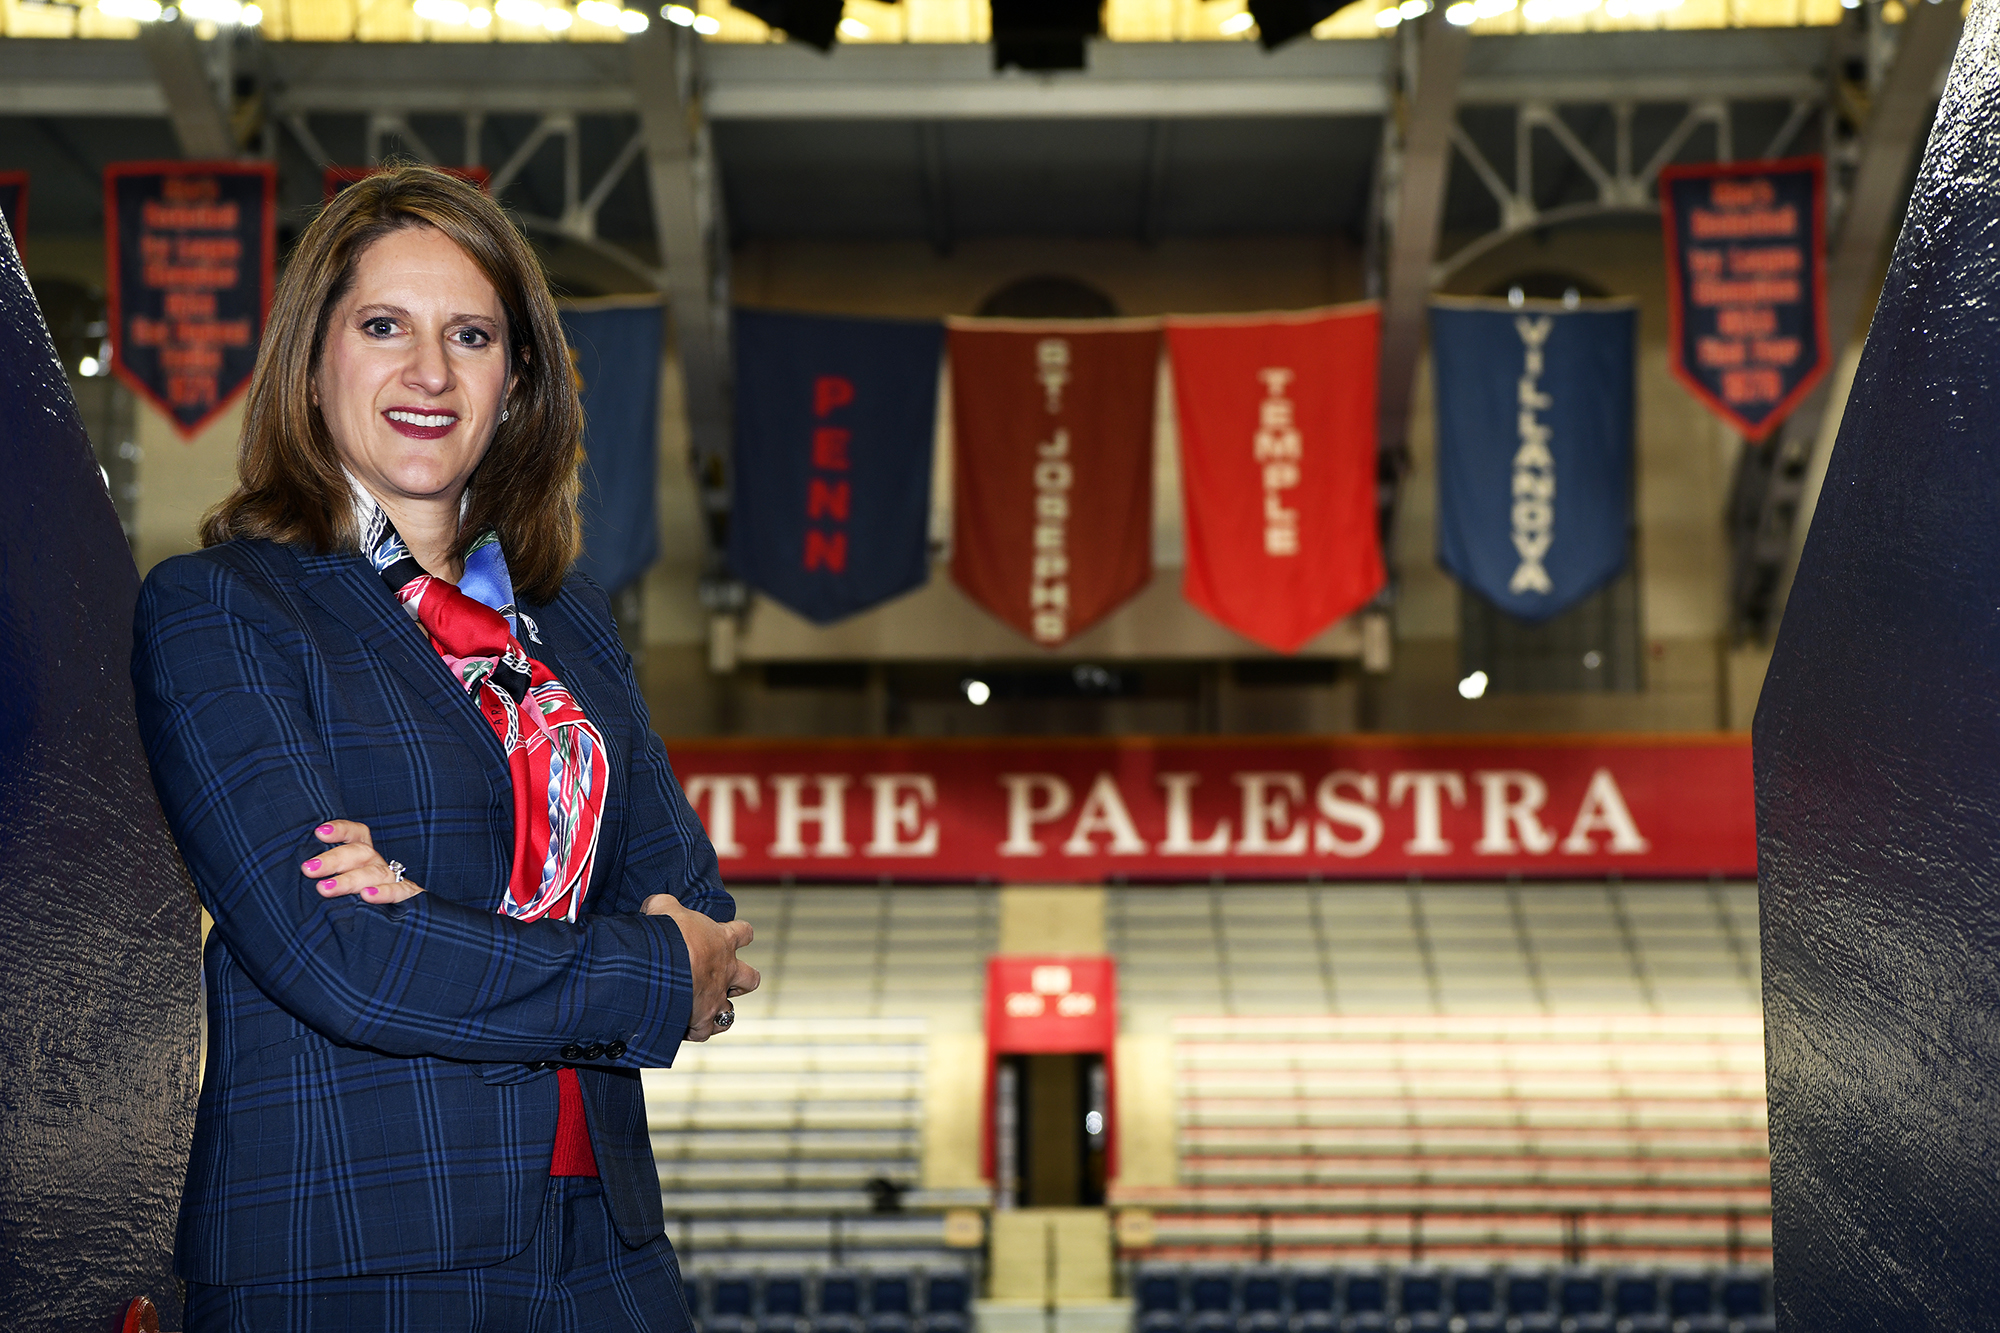 AD M. Grace Calhoun poses in the concourse at the Palestra.